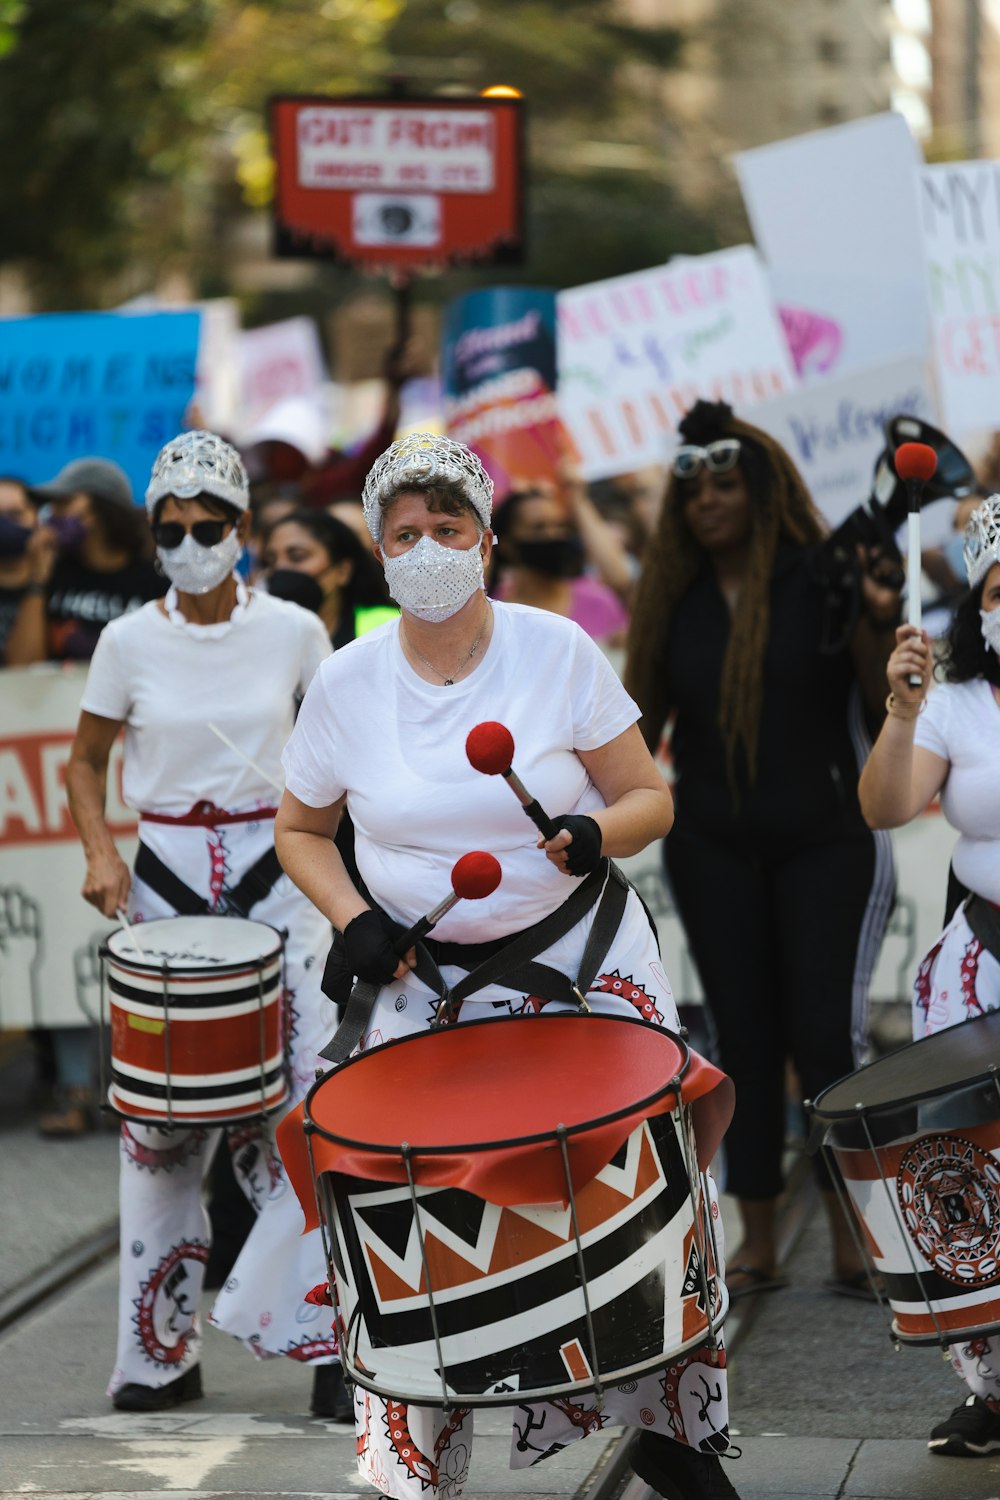 a group of people with masks and drums